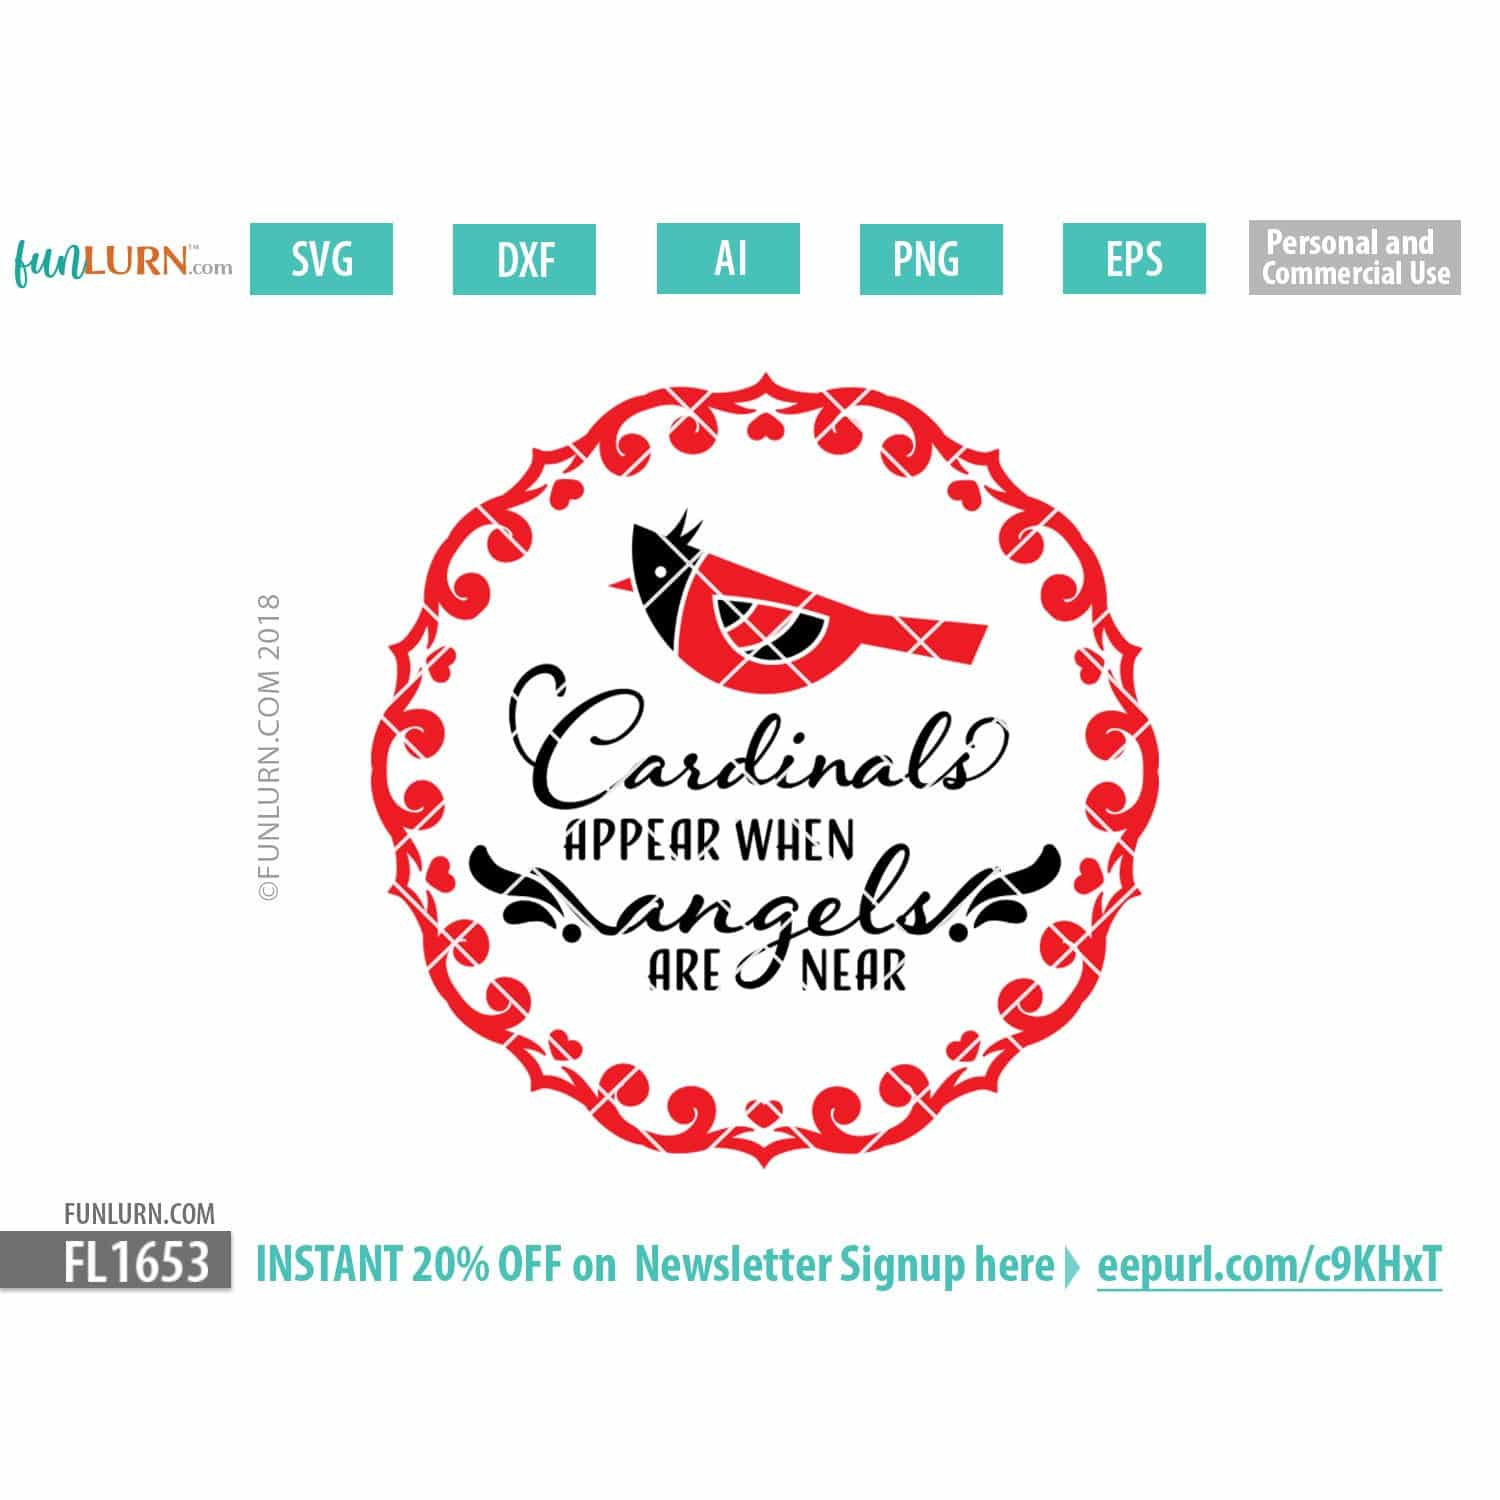 Download Cardinals appear when angels are near SVG cut file - FunLurn